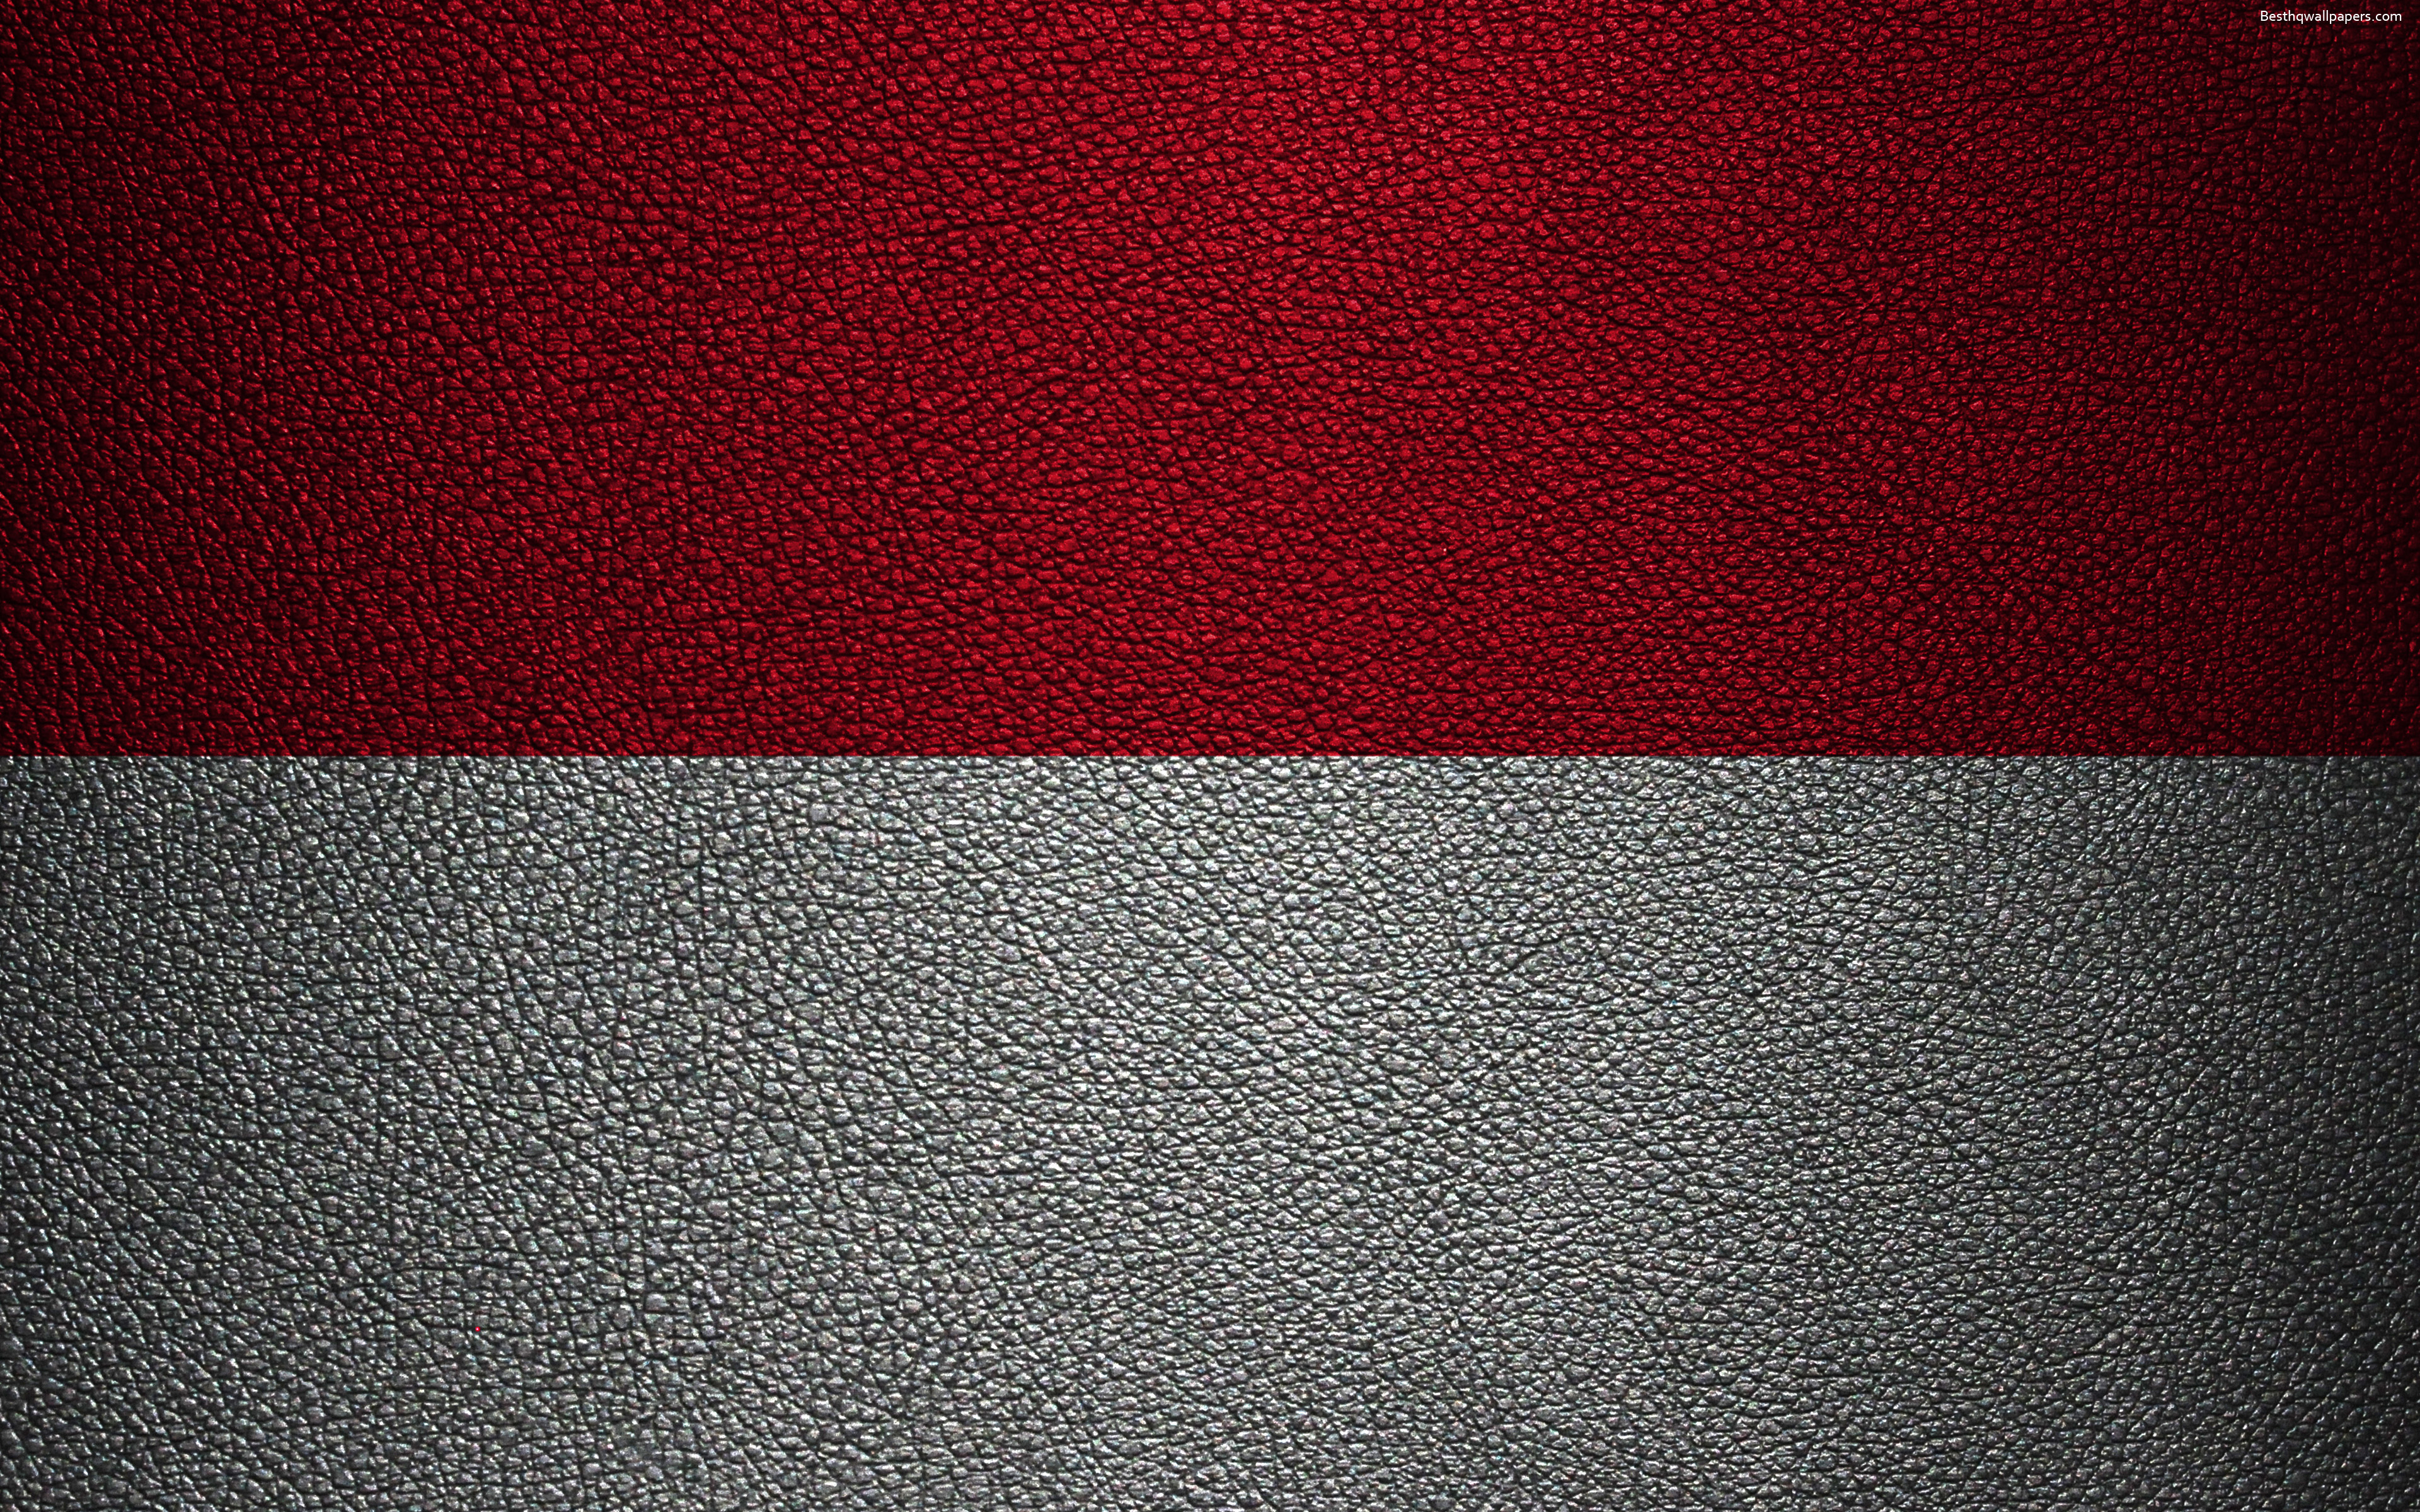 Download wallpaper Flag of Indonesia, 4K, leather texture, Oceania, Indonesia, world flags, Indonesian flag for desktop with resolution 3840x2400. High Quality HD picture wallpaper